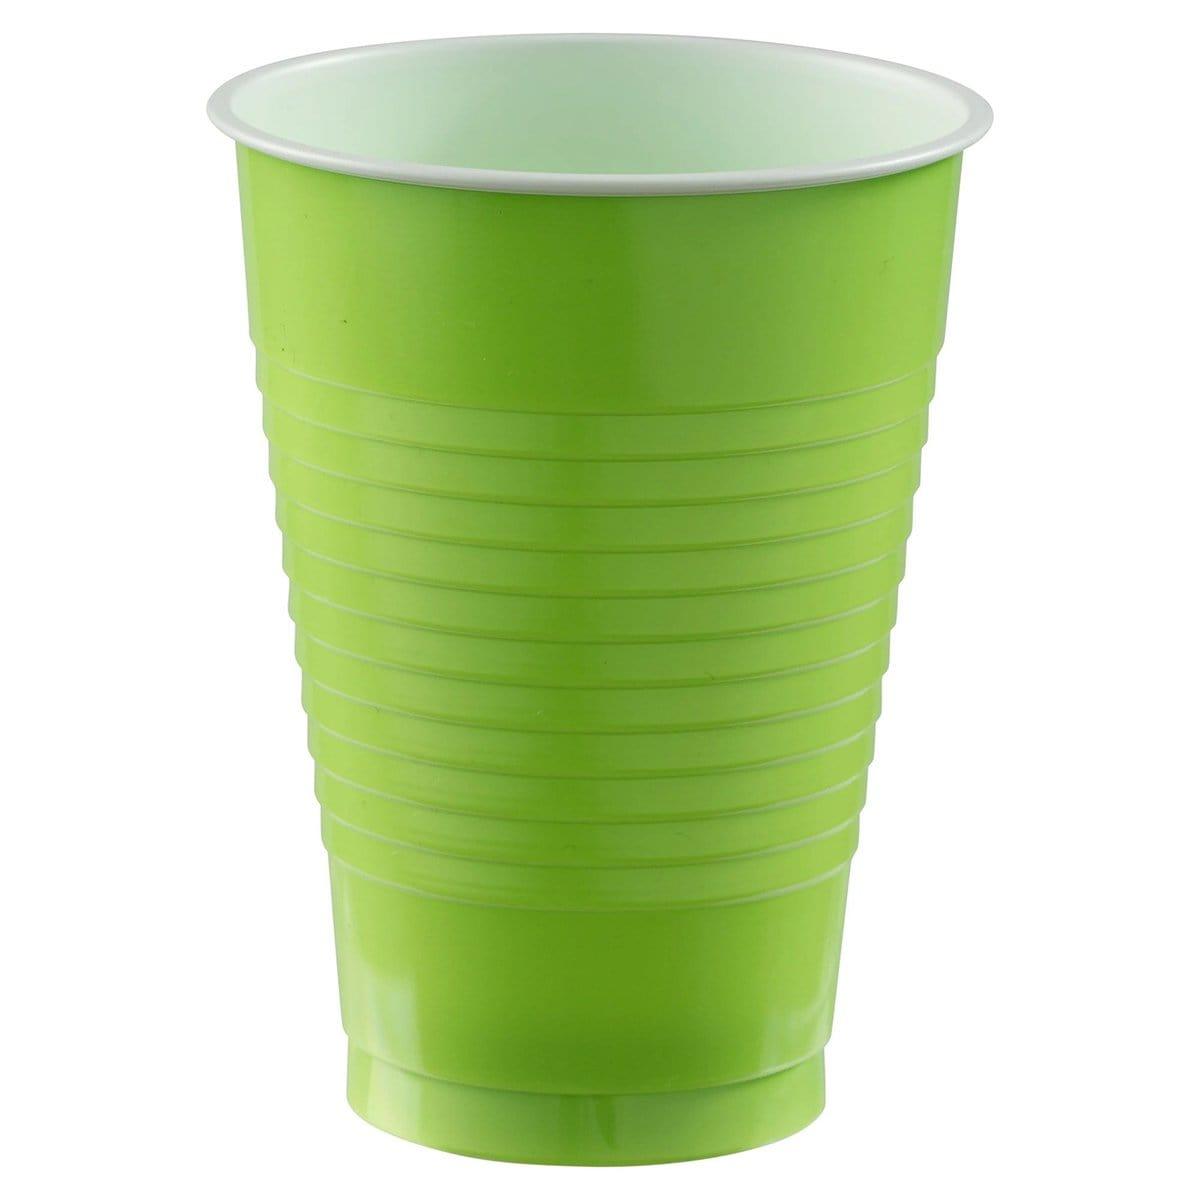 Buy plasticware Kiwi Plastic Cups, 12 oz., 20 Count sold at Party Expert